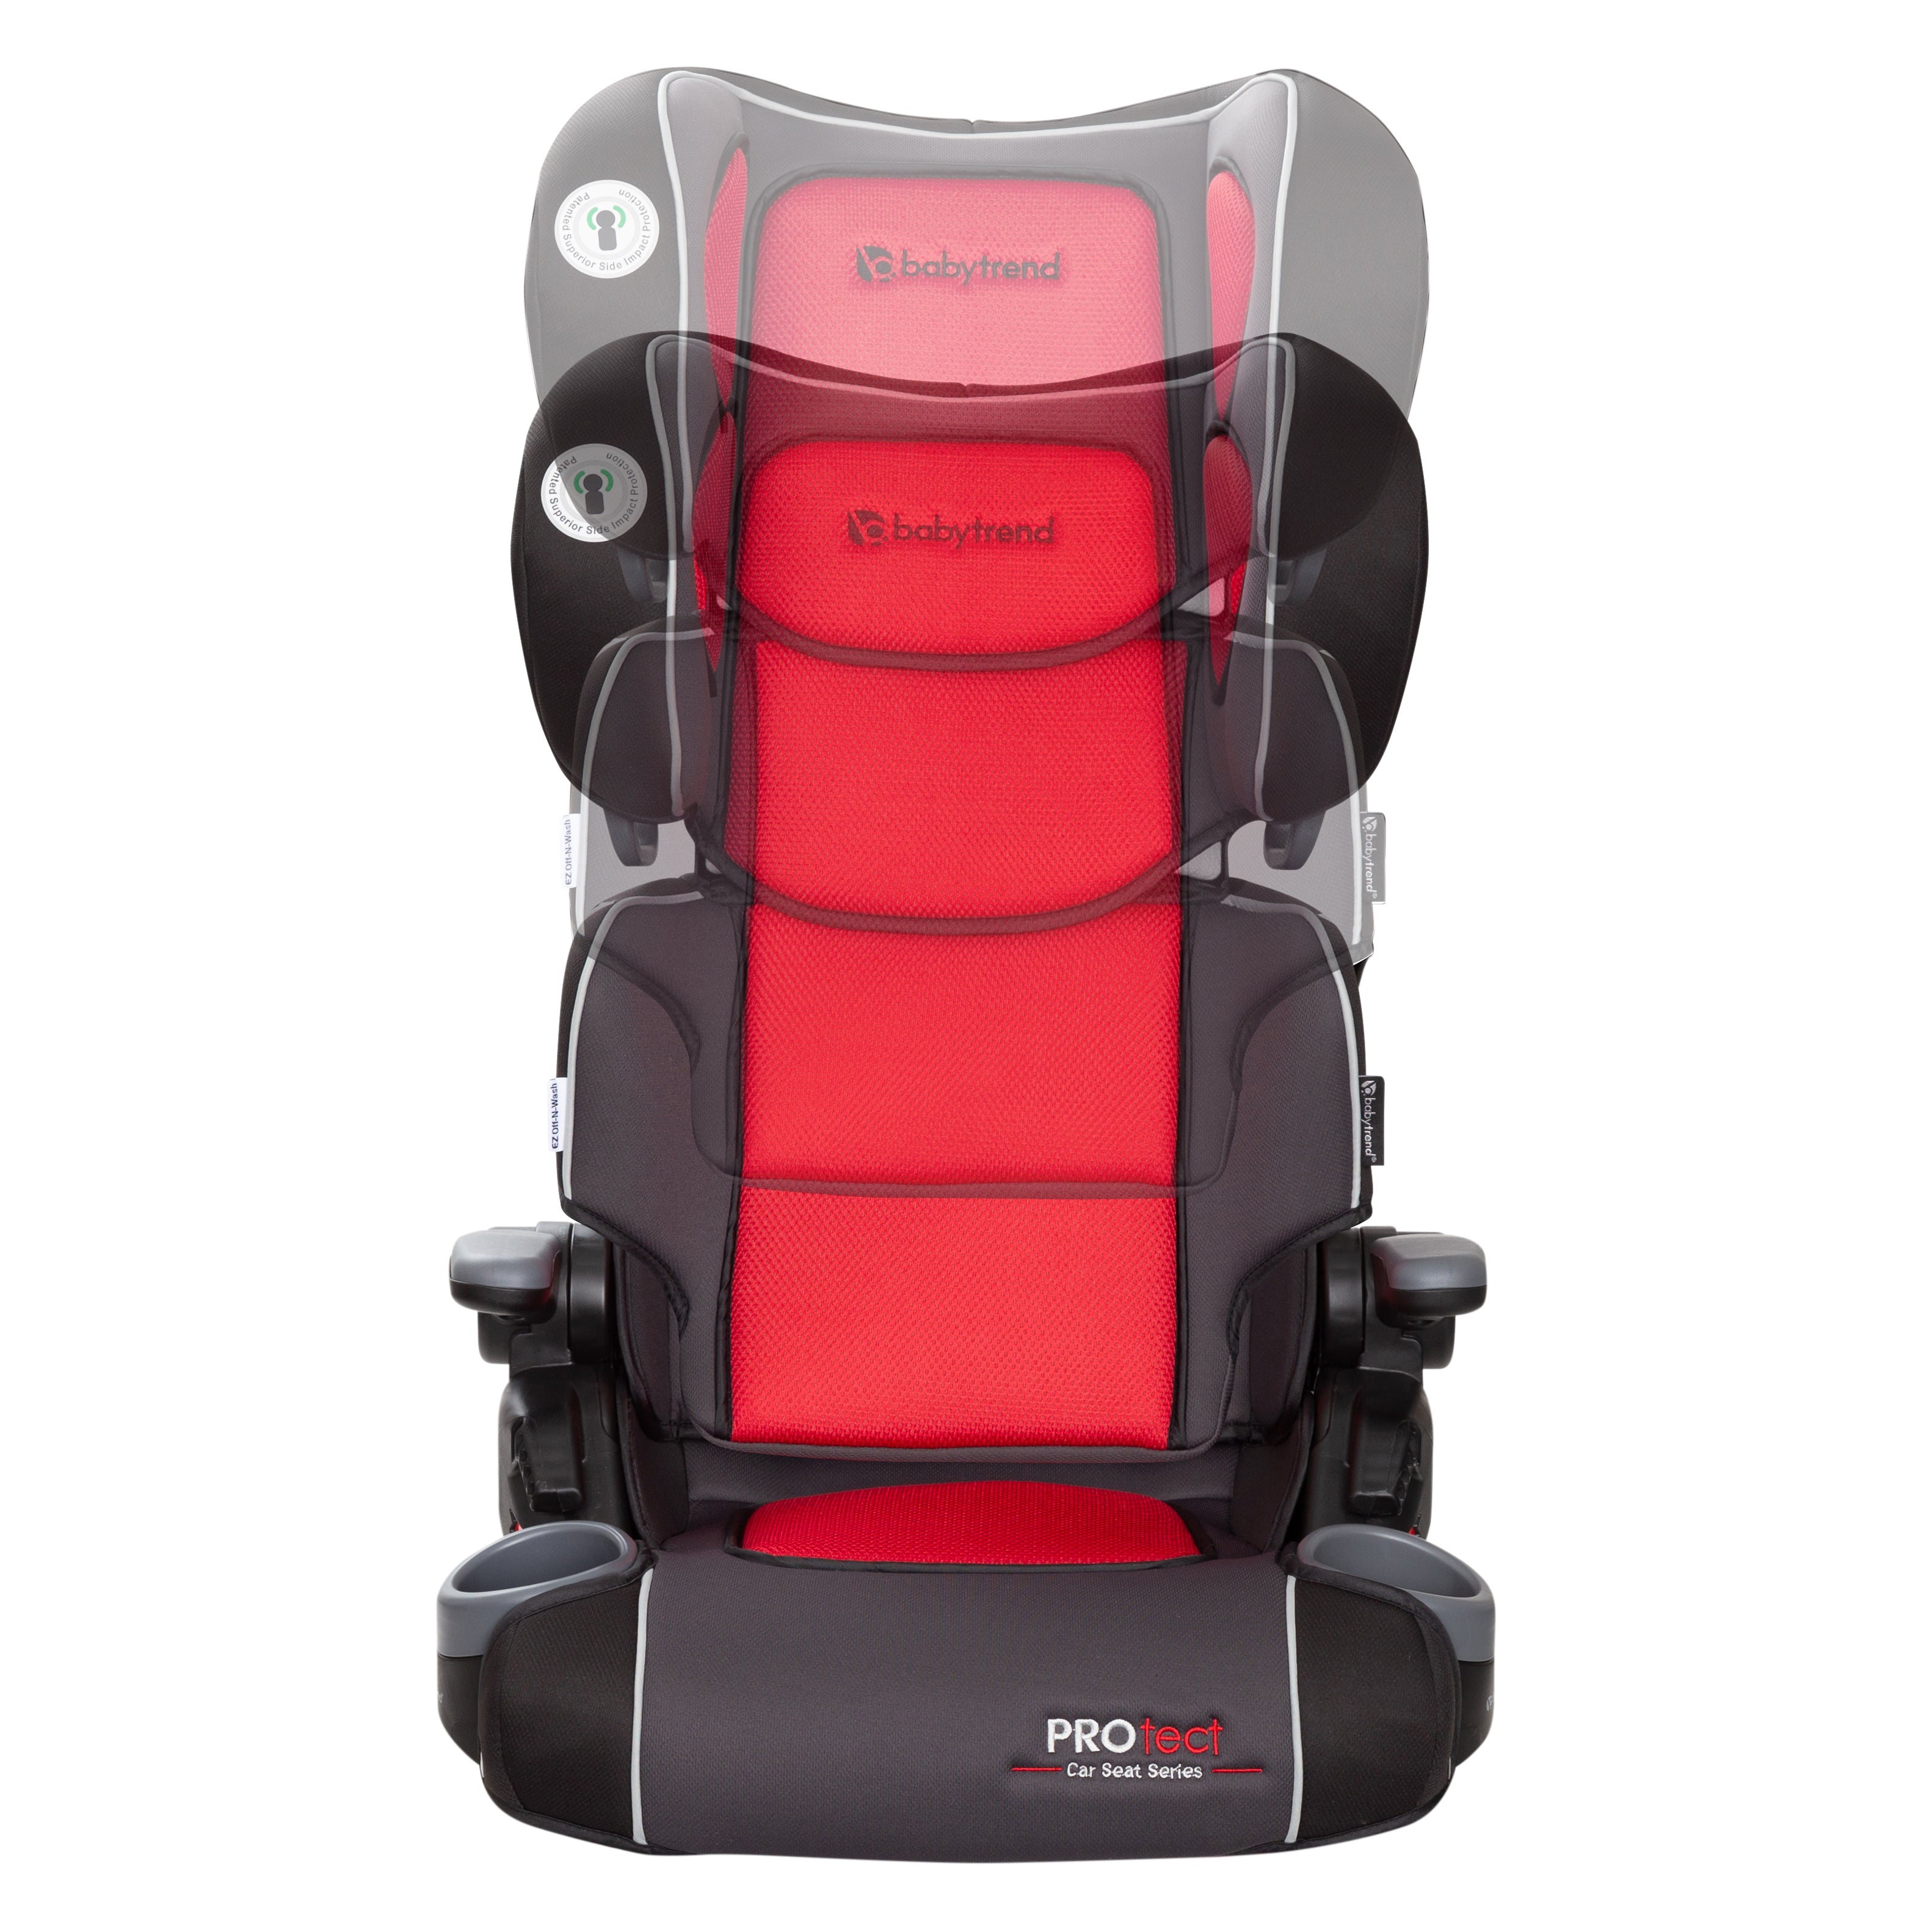  SUAIOLOAQ Adult car Booster seat, Booster pad Portable  Breathable mesh, Ideal for car Office, Home, use in All Seasons (Color :  Red) : Patio, Lawn & Garden